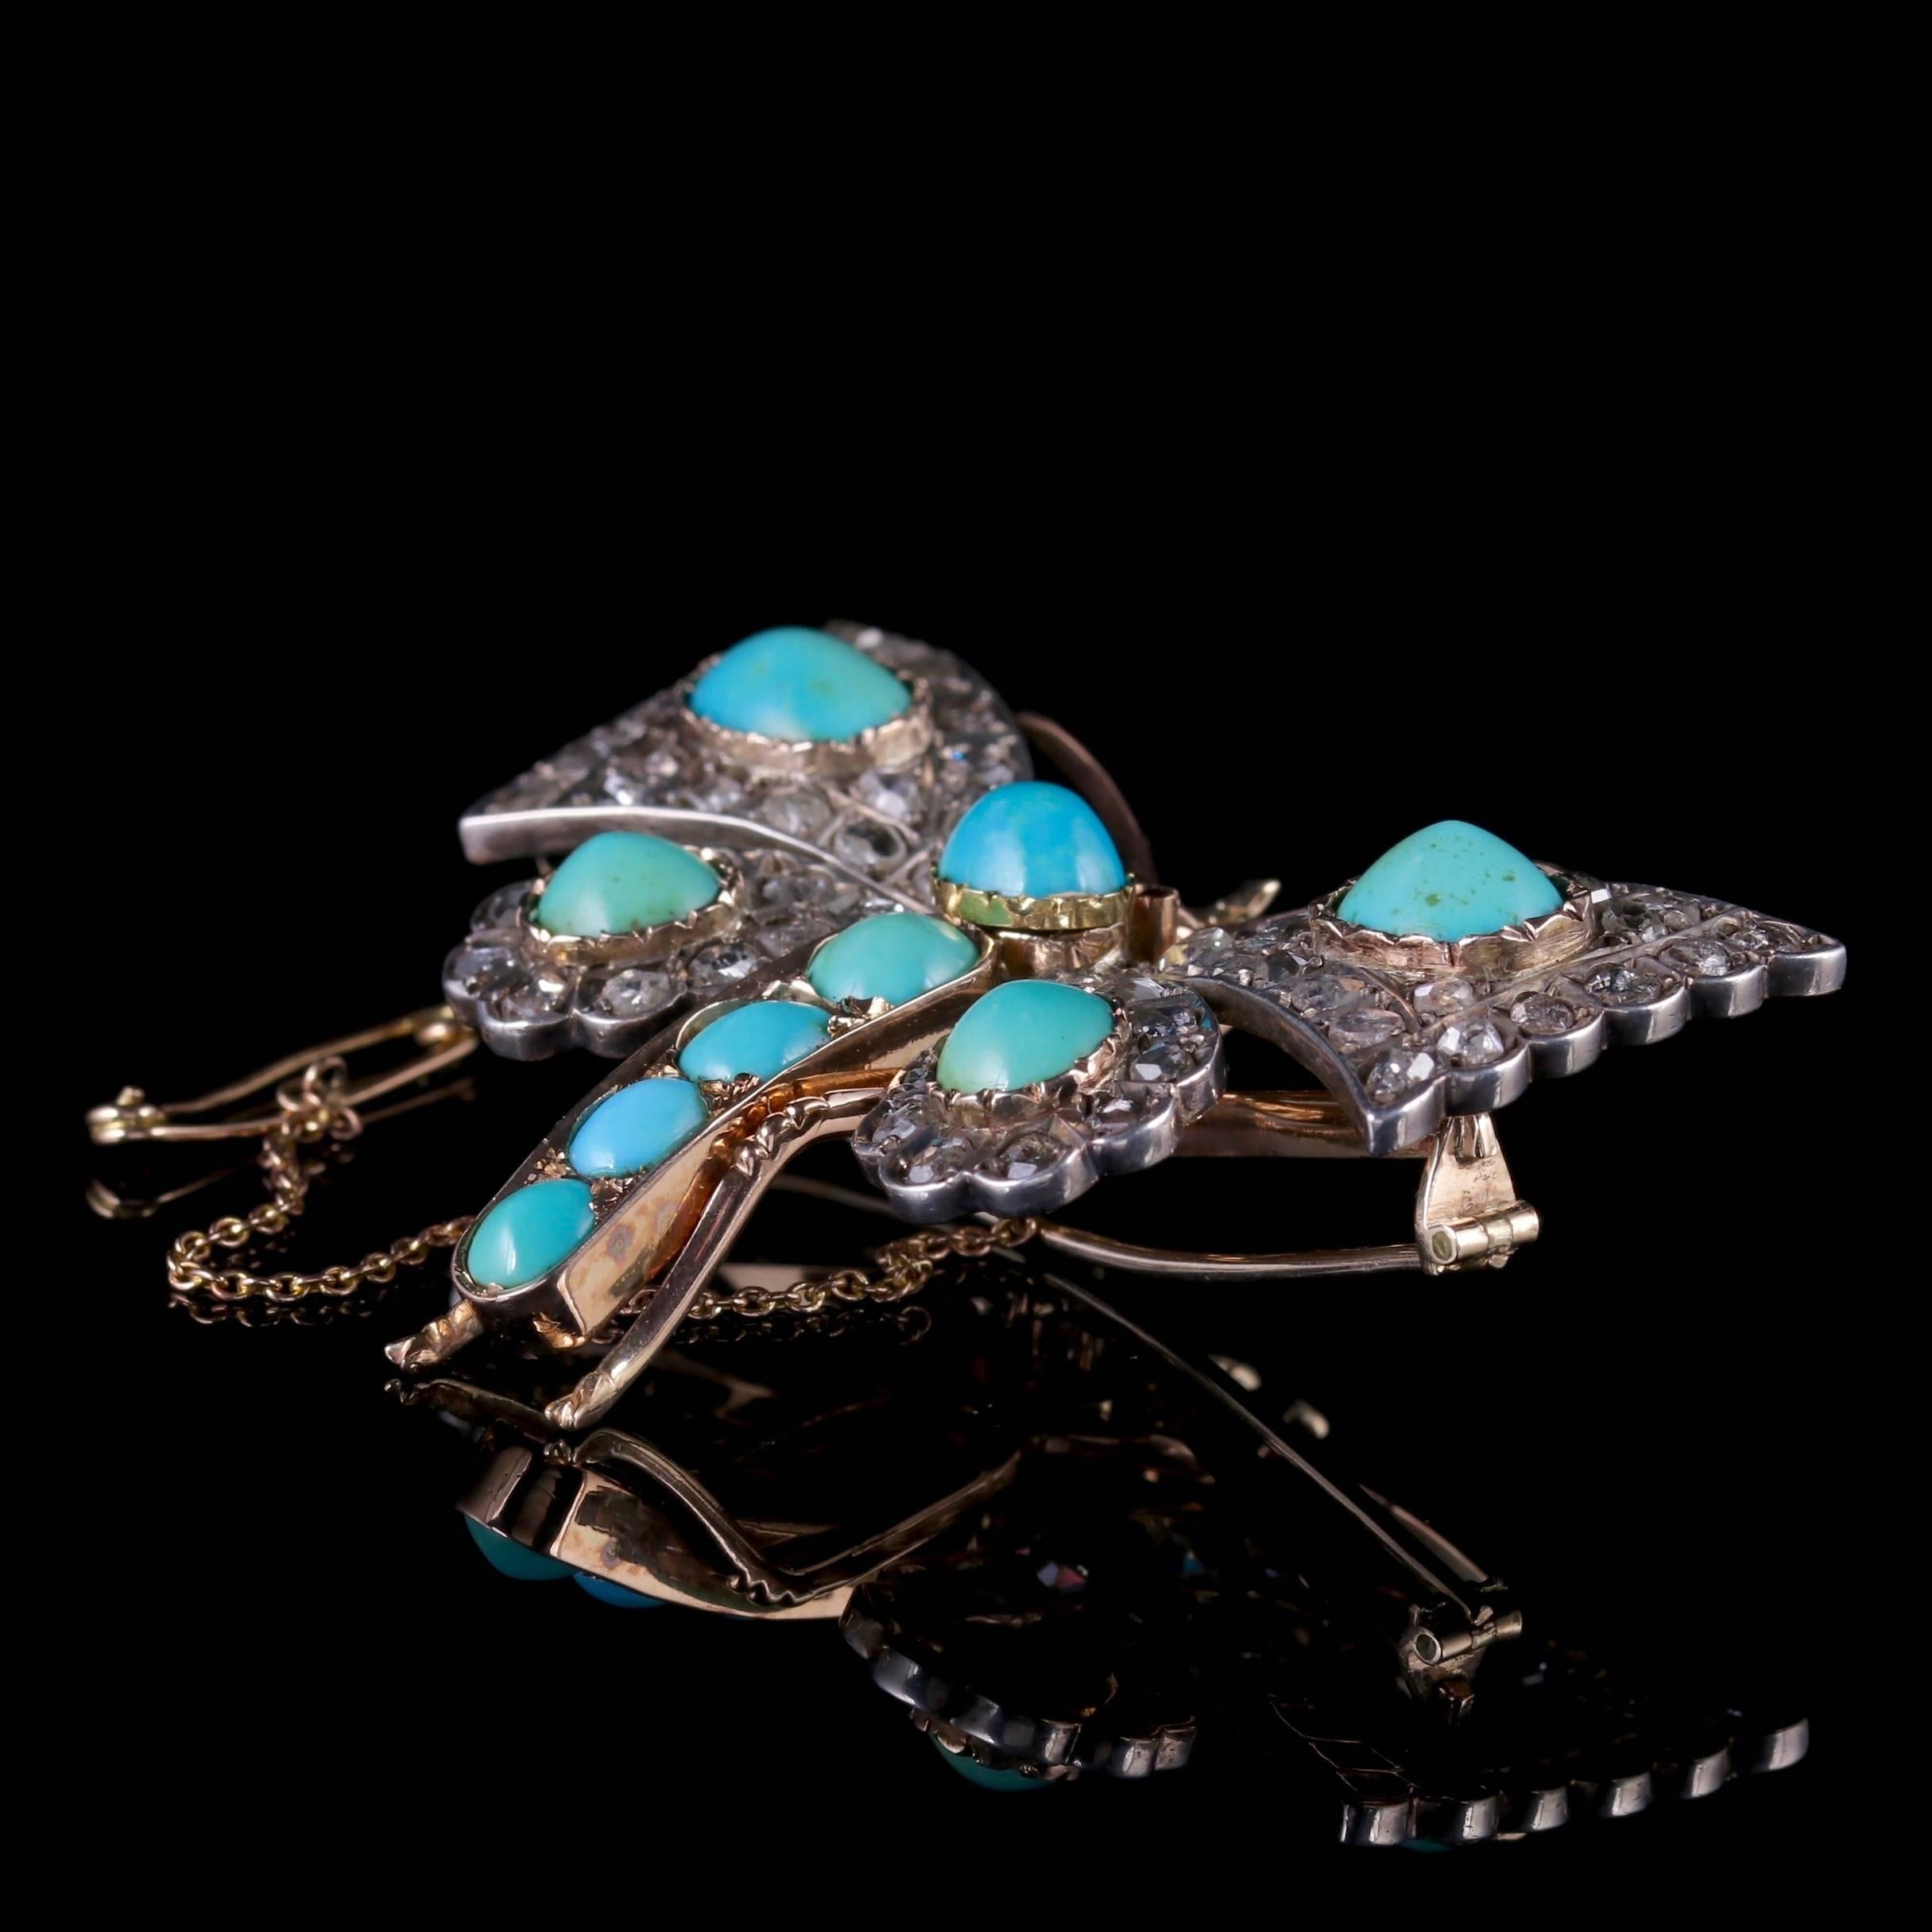 Antique Victorian Butterfly Brooch Turquoise Diamond 18 Carat Gold, circa 1860 In Excellent Condition For Sale In Lancaster, Lancashire